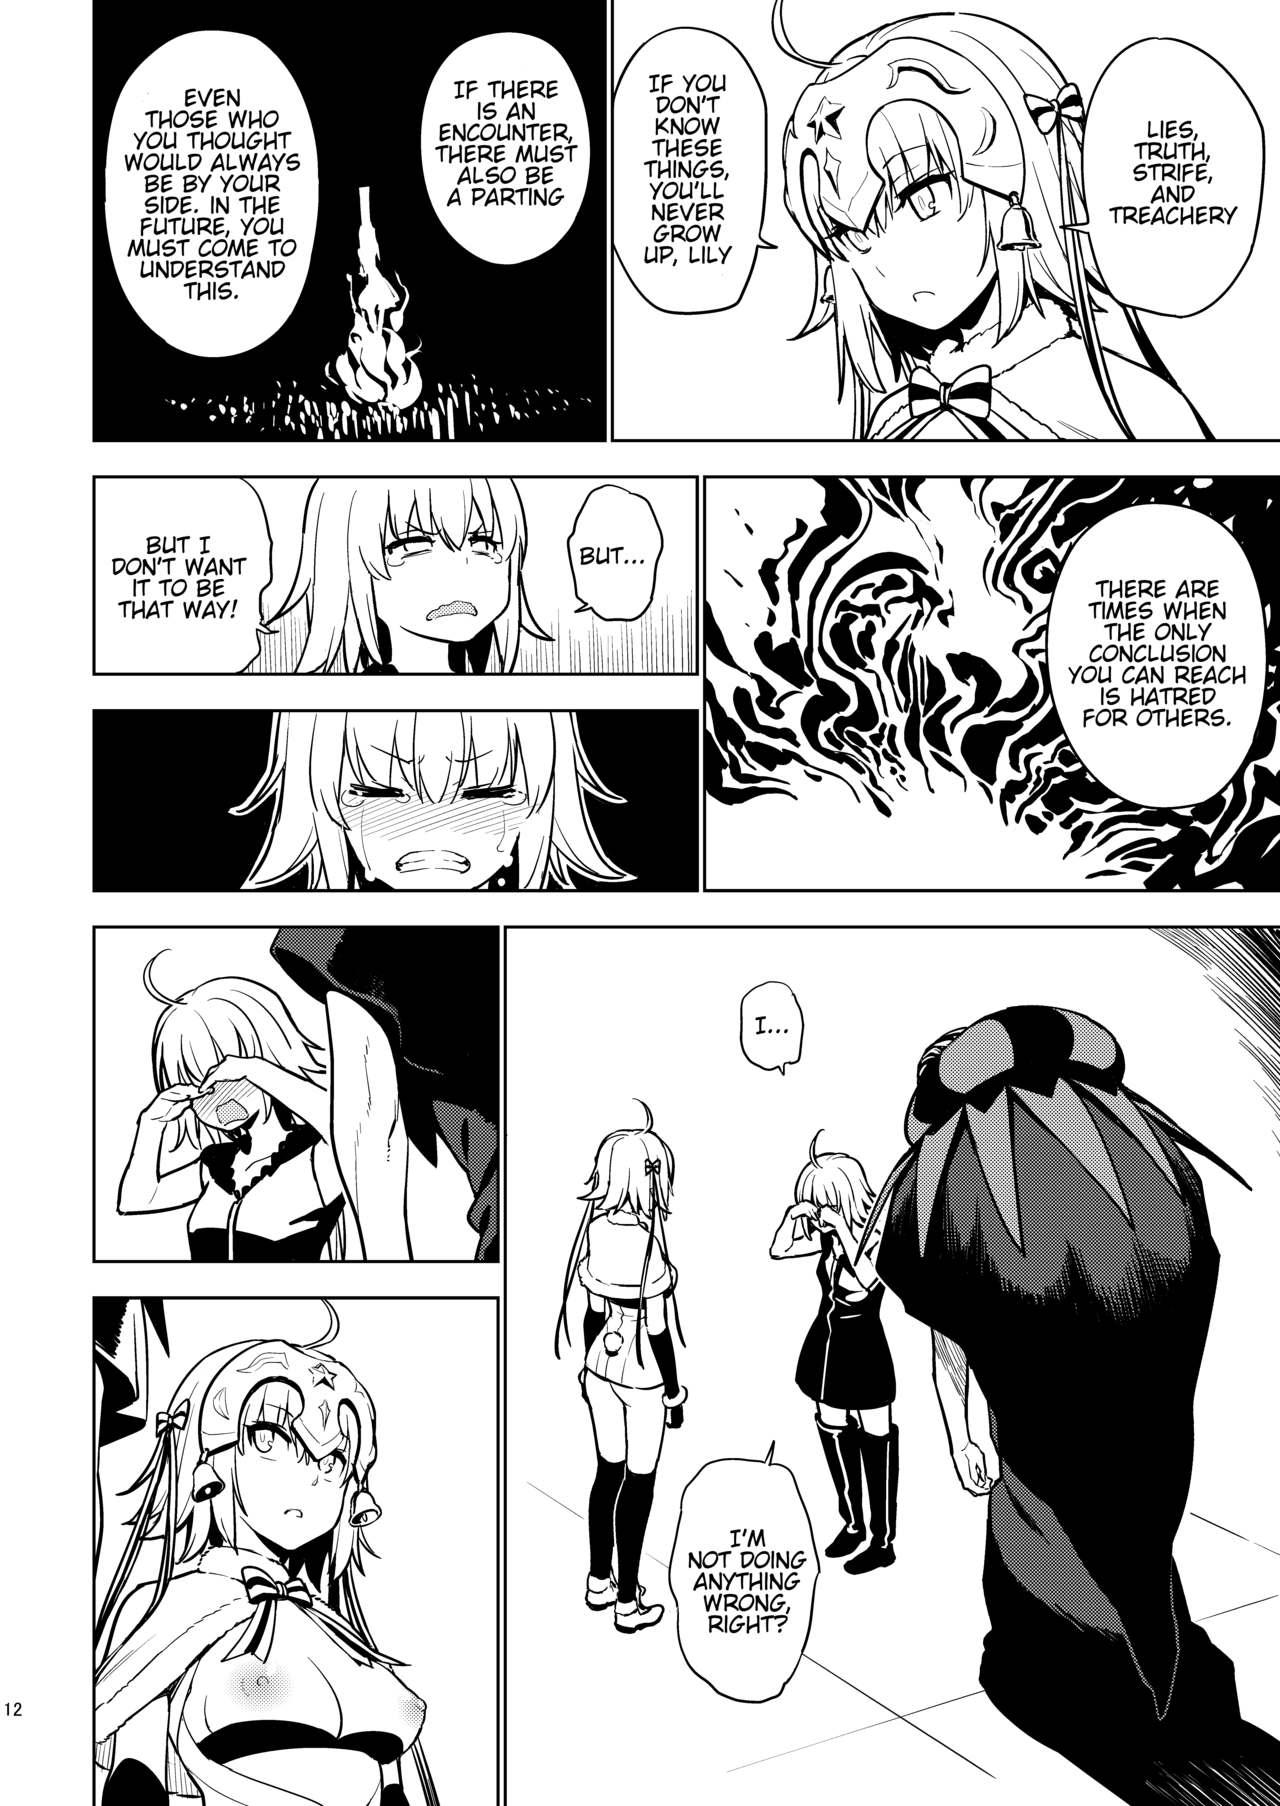 First Time SO BORED - Fate grand order Shemale Sex - Page 10